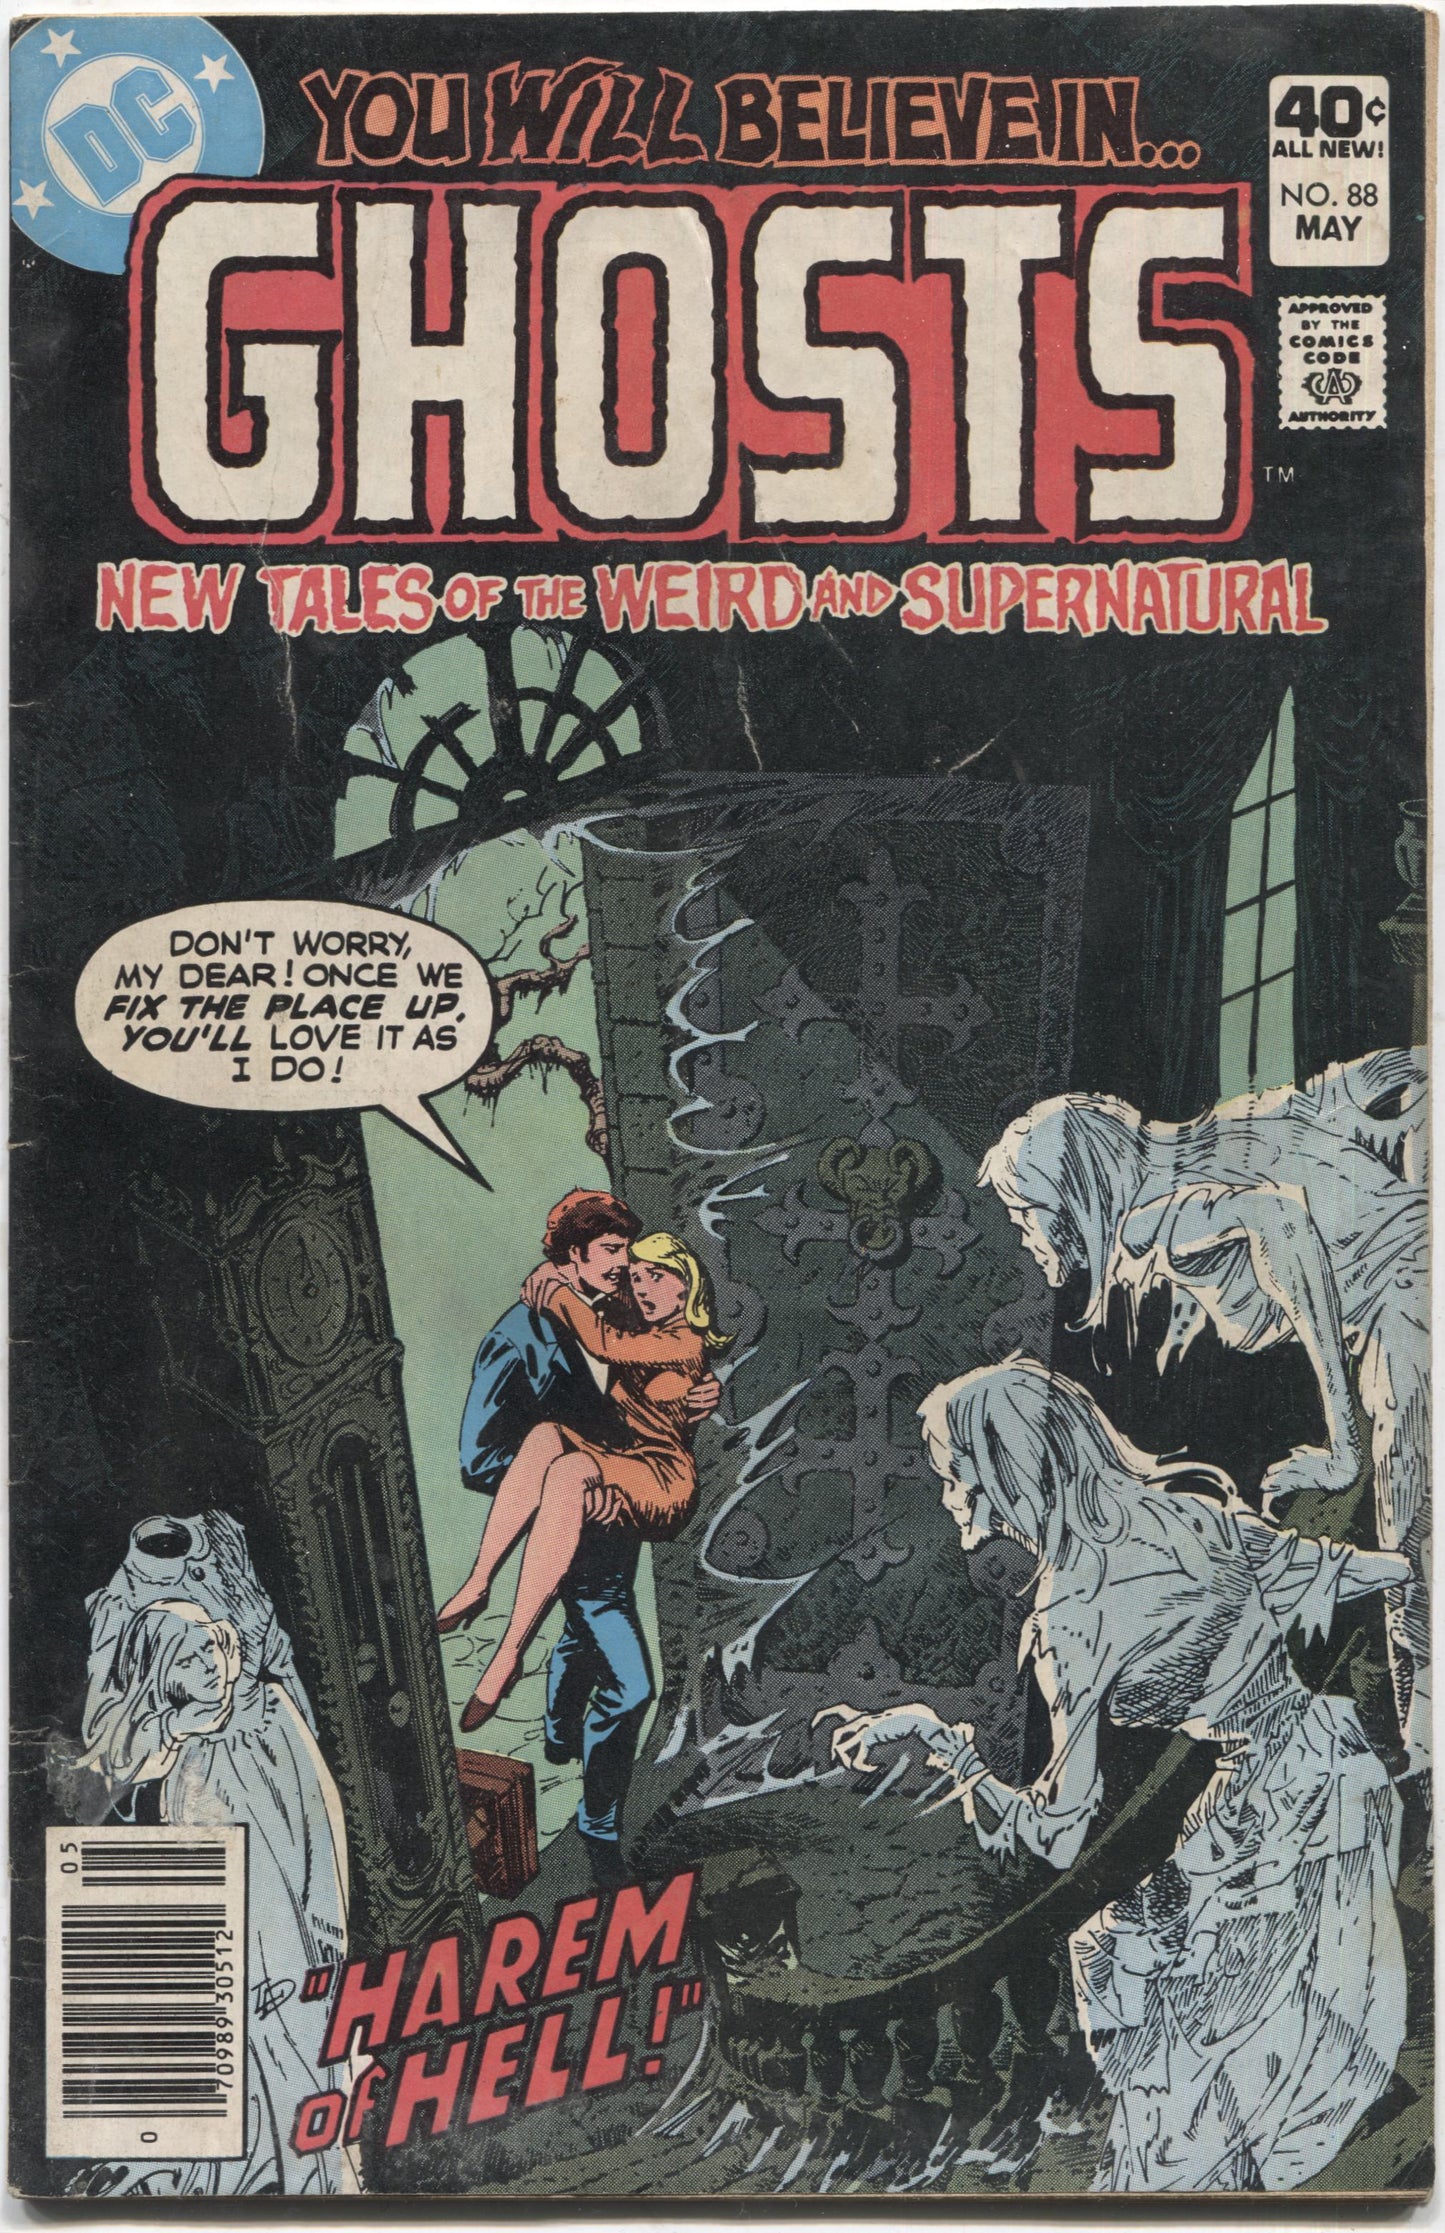 Ghosts No. 88, "Harem of Hell," DC Comics, May 1980